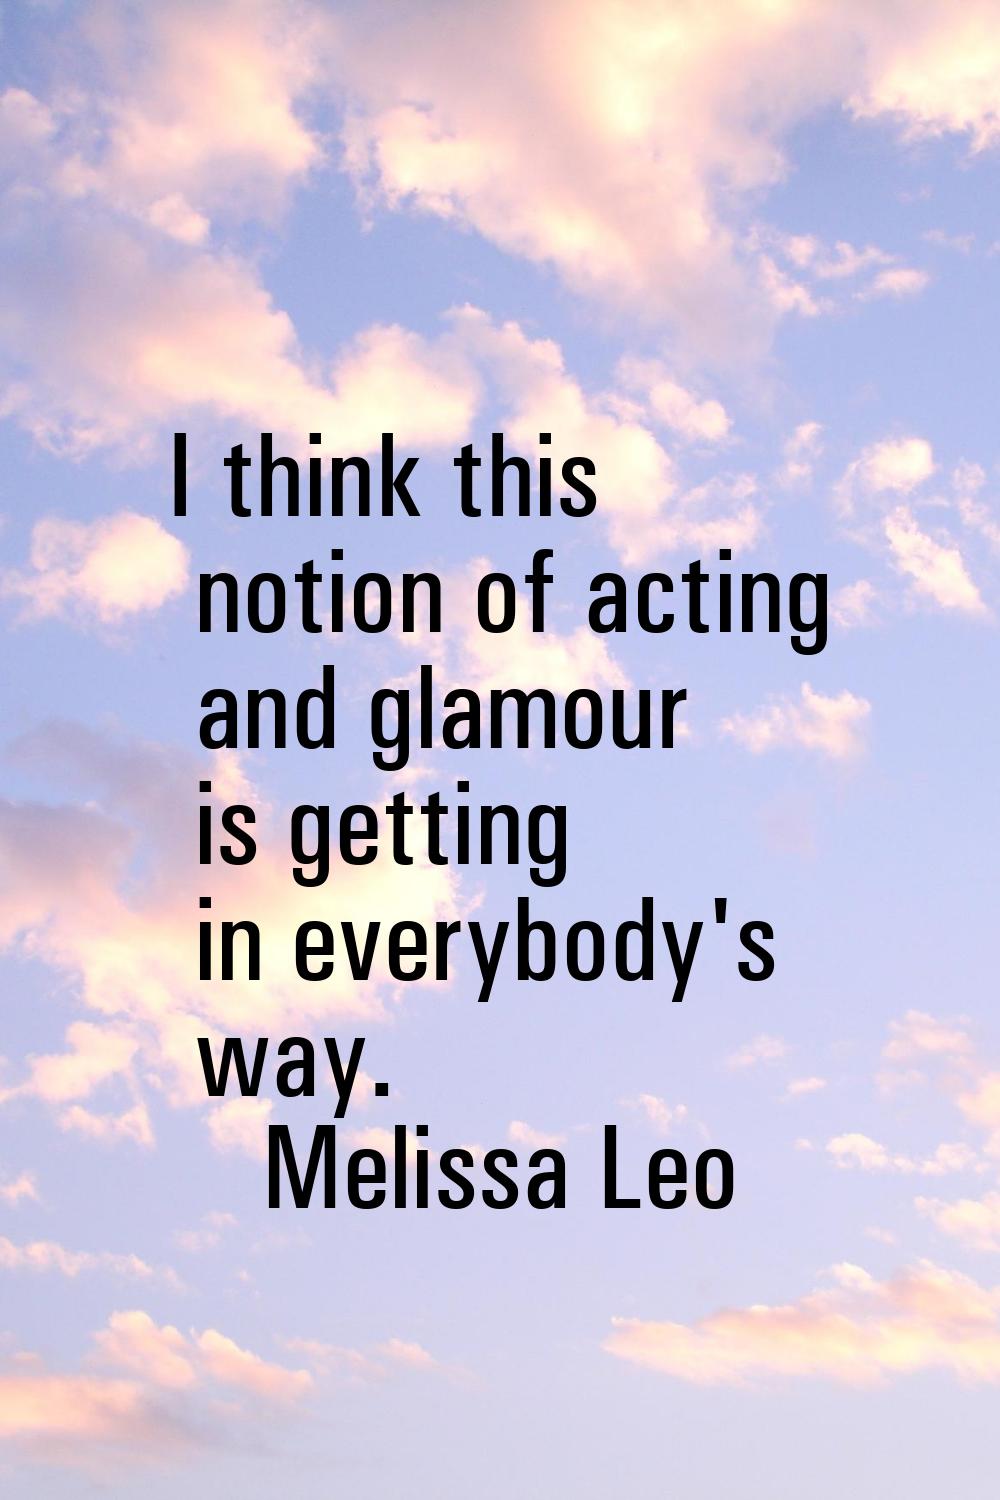 I think this notion of acting and glamour is getting in everybody's way.